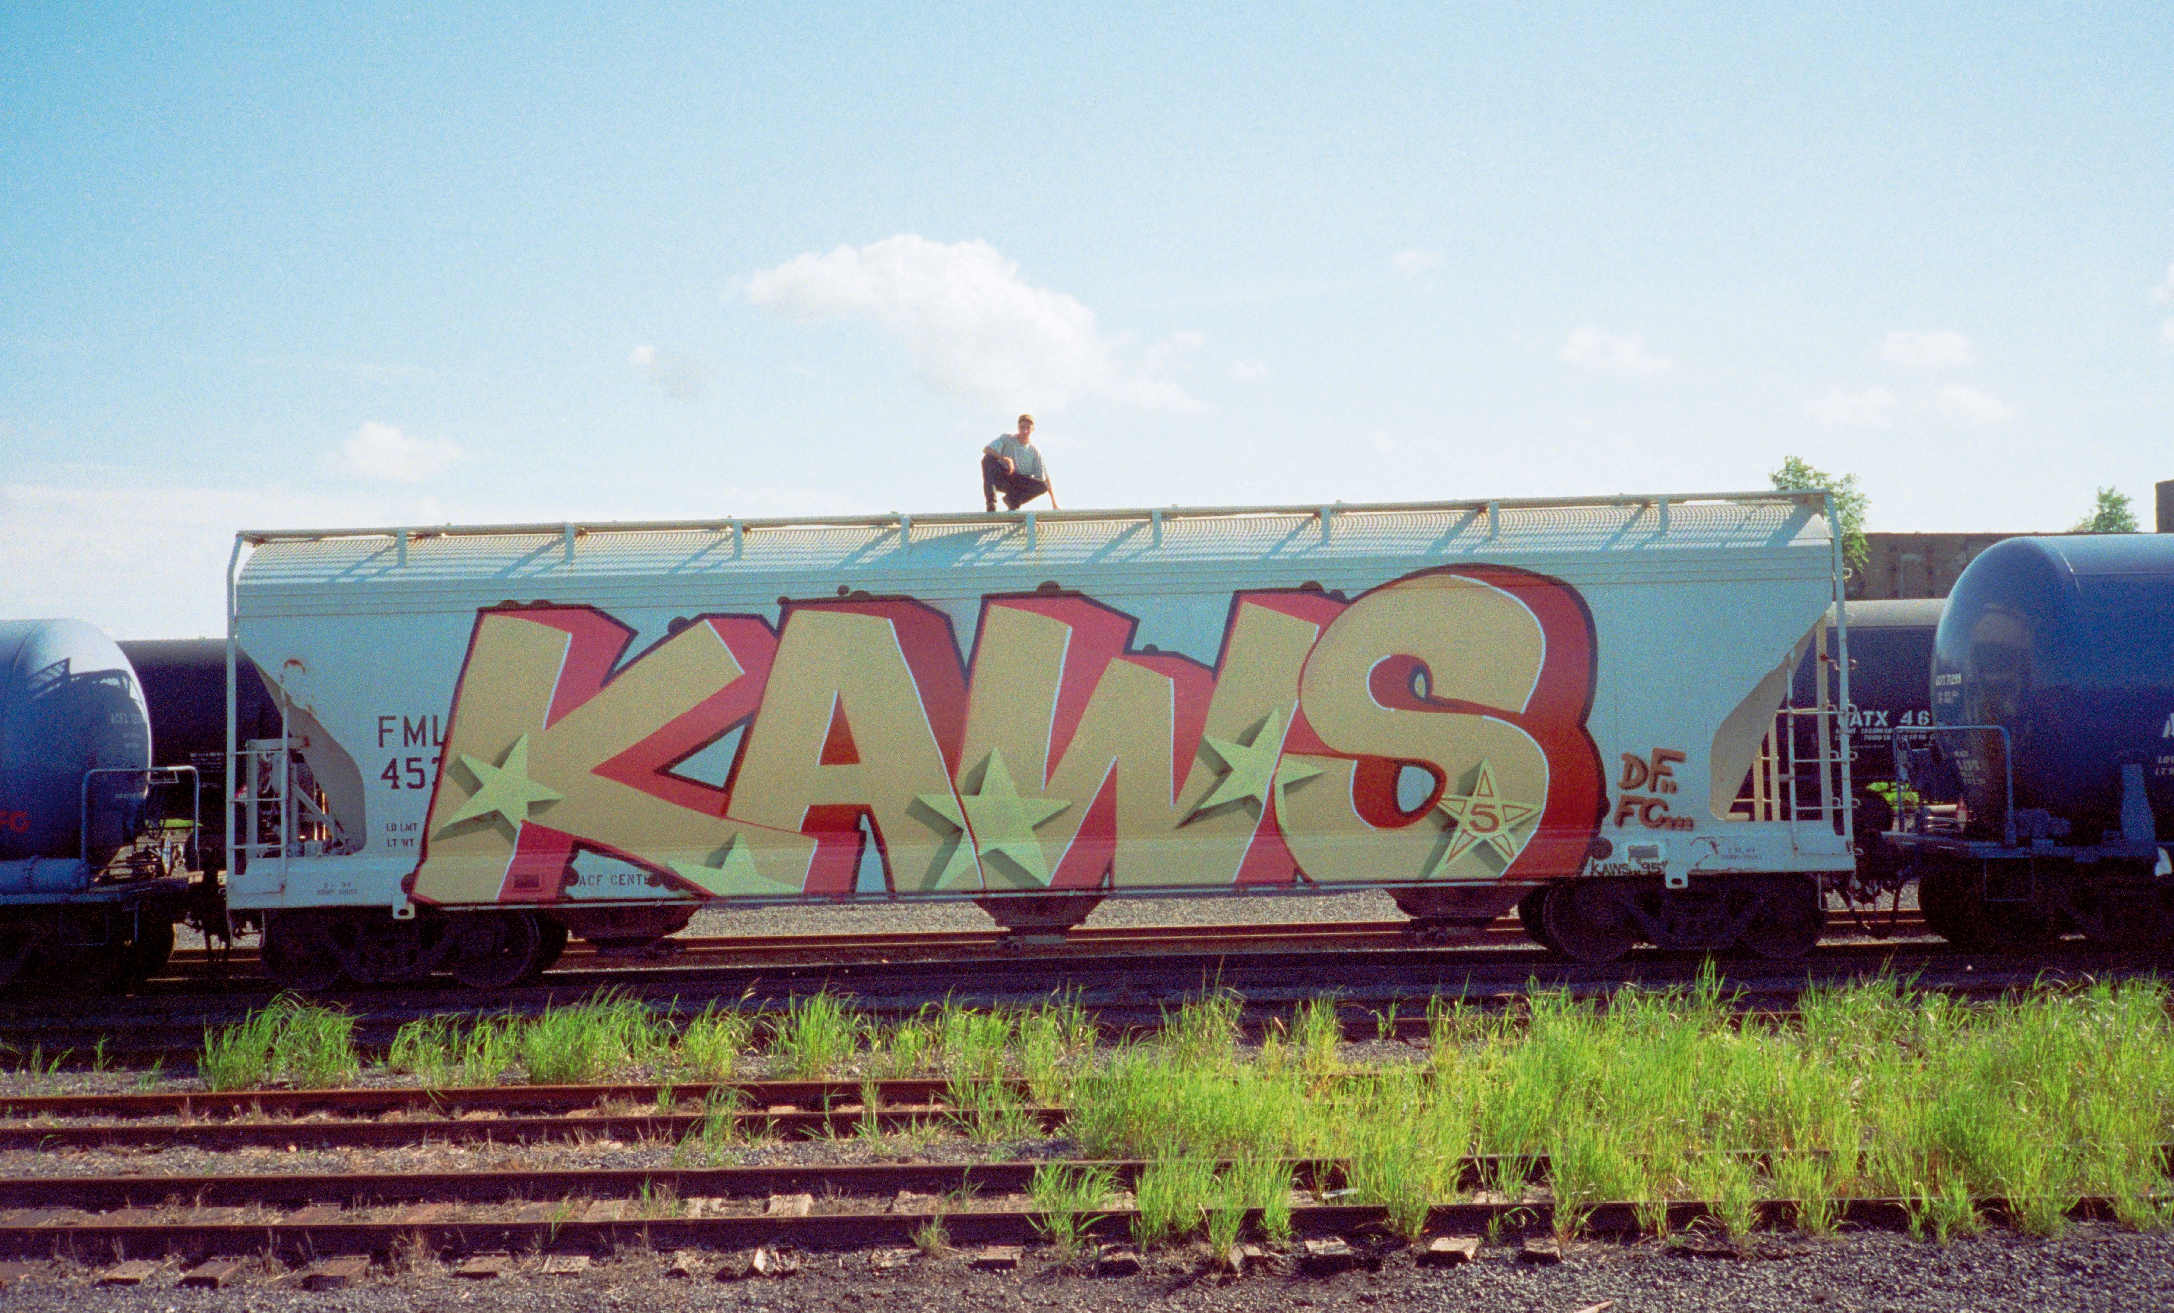 UNTITLED (KAWS), 1995, Spray paint on freight train, New Jersey / © KAWS 